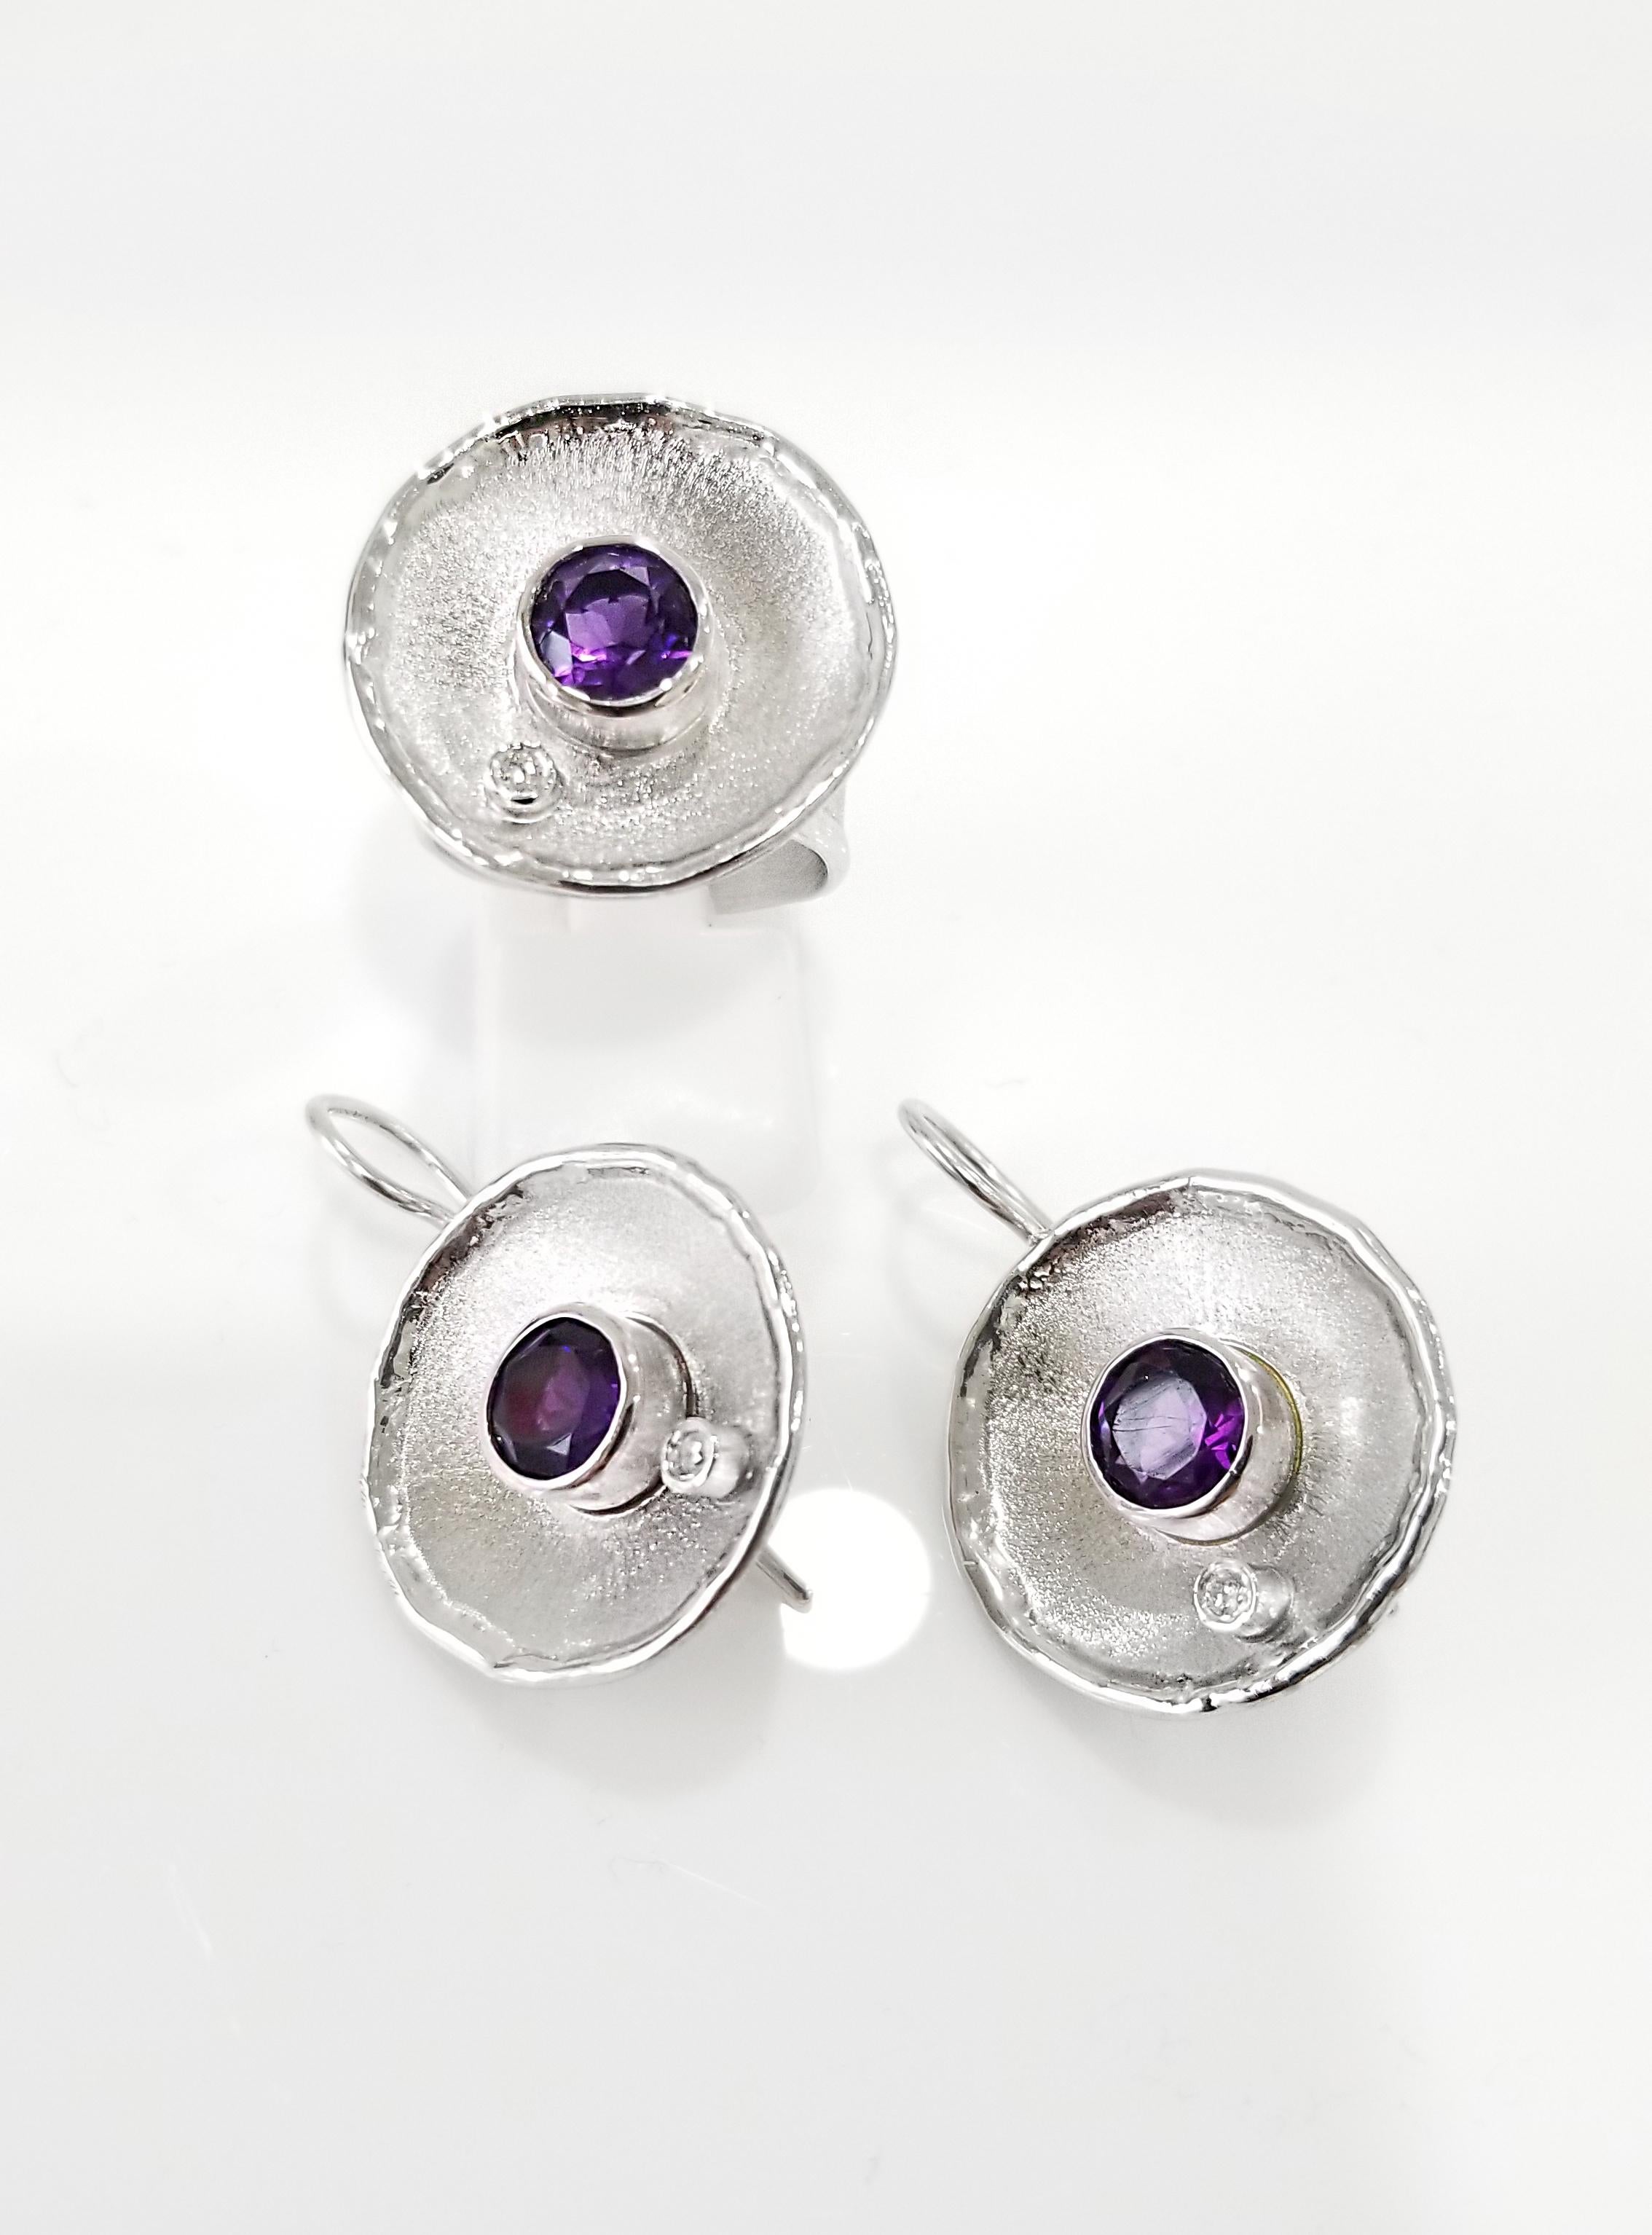 Yianni Creations Ammos Collection 100% Handmade Artisan Set of Earrings and a Ring from Fine Silver 950 Purity plated with Palladium to resist against Elements. Each earring feature 1.80 Carat Round Cut Amethyst and 0.03 Carat Brilliant Cut White